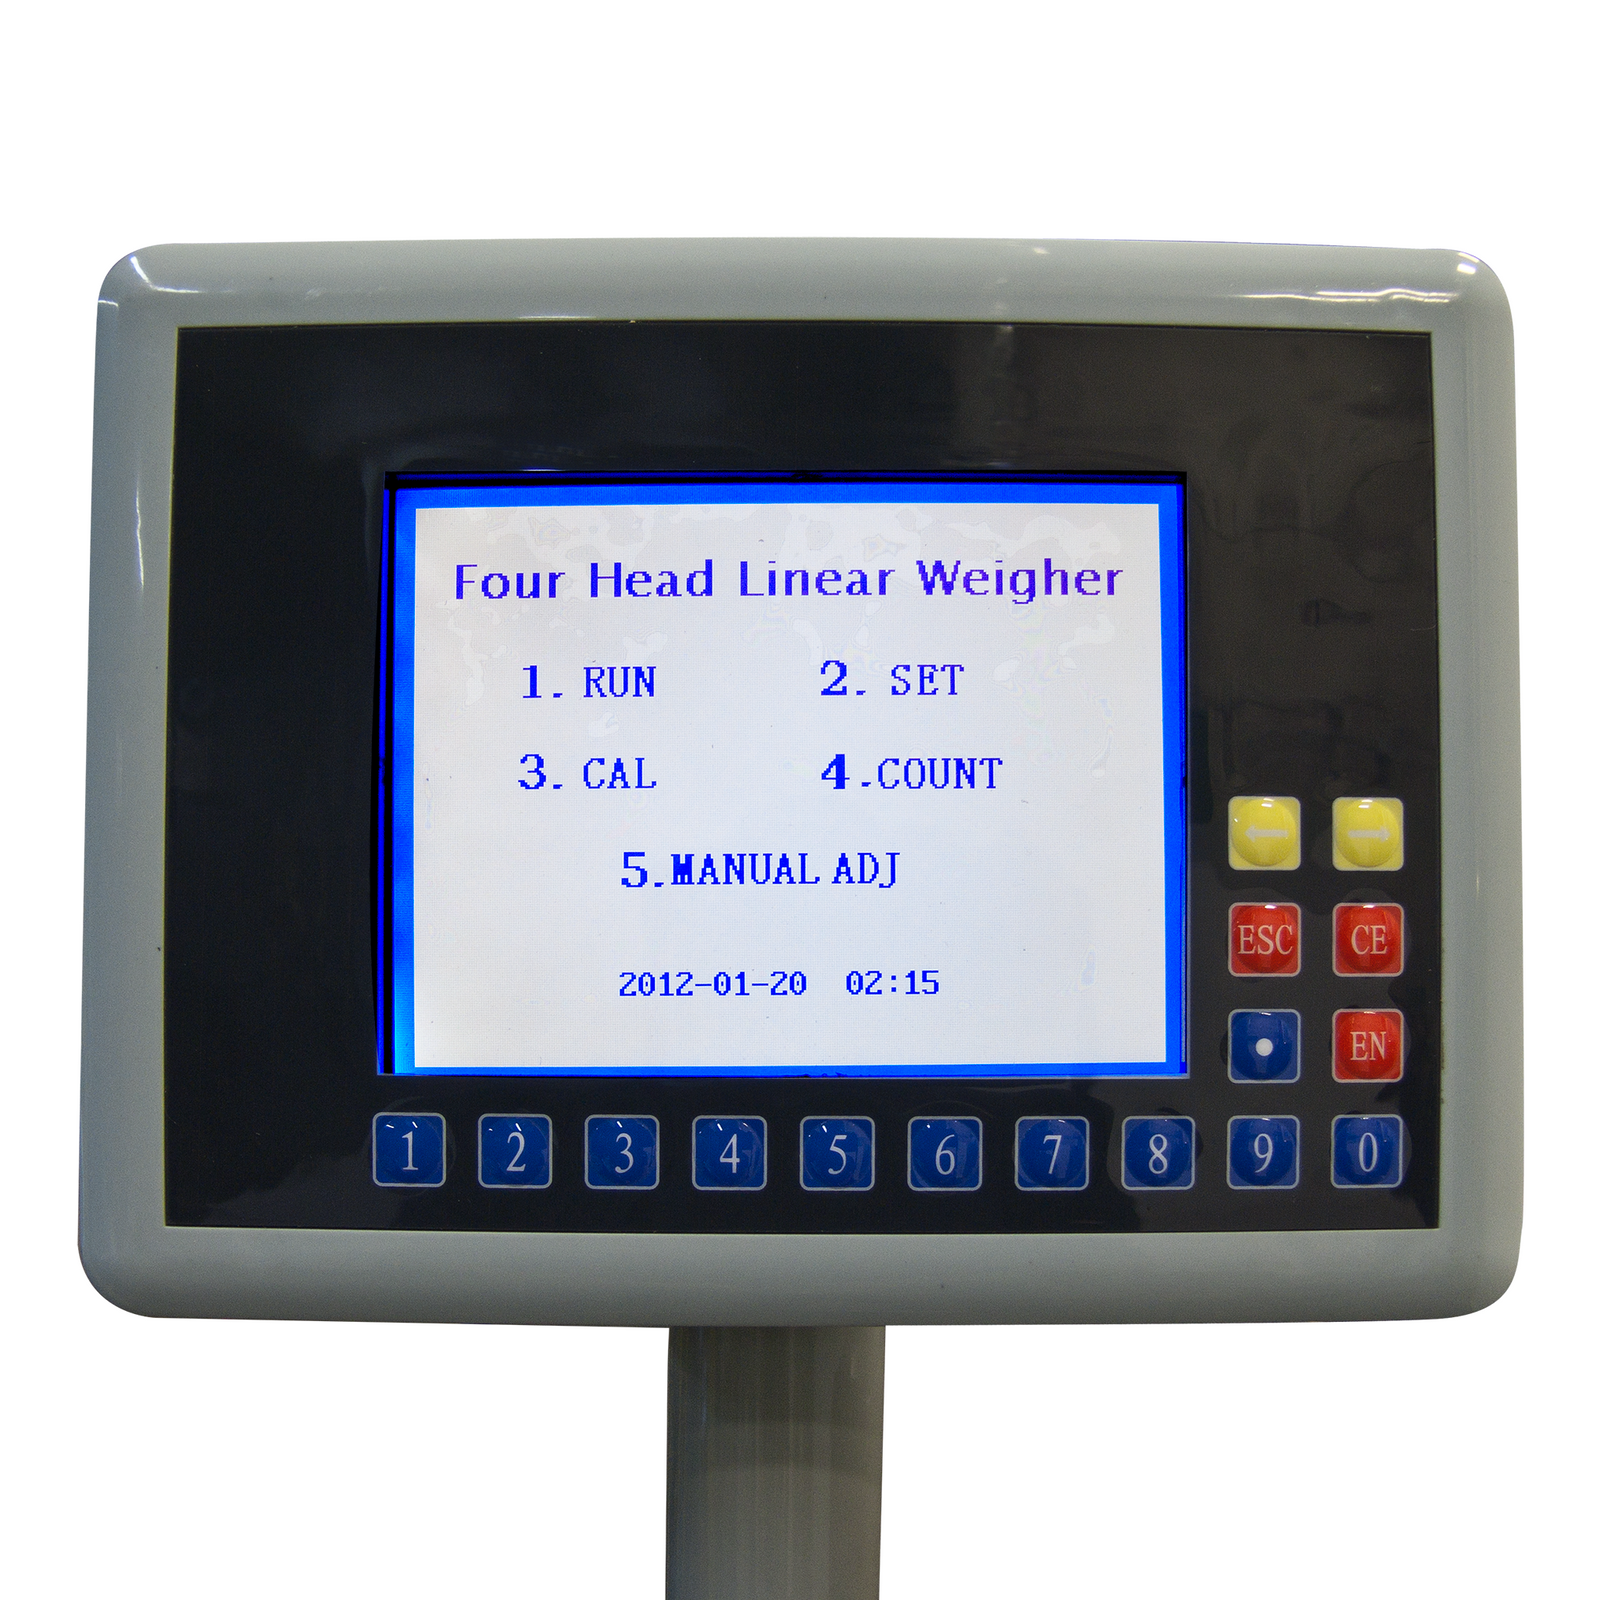 Control panel with LCD display on a JORES TECHNOLOGIES® ® 4 head linear weigh machine. The screen is on and shows the options of Run, Set, Calibrate, Count, and Manual adjustment